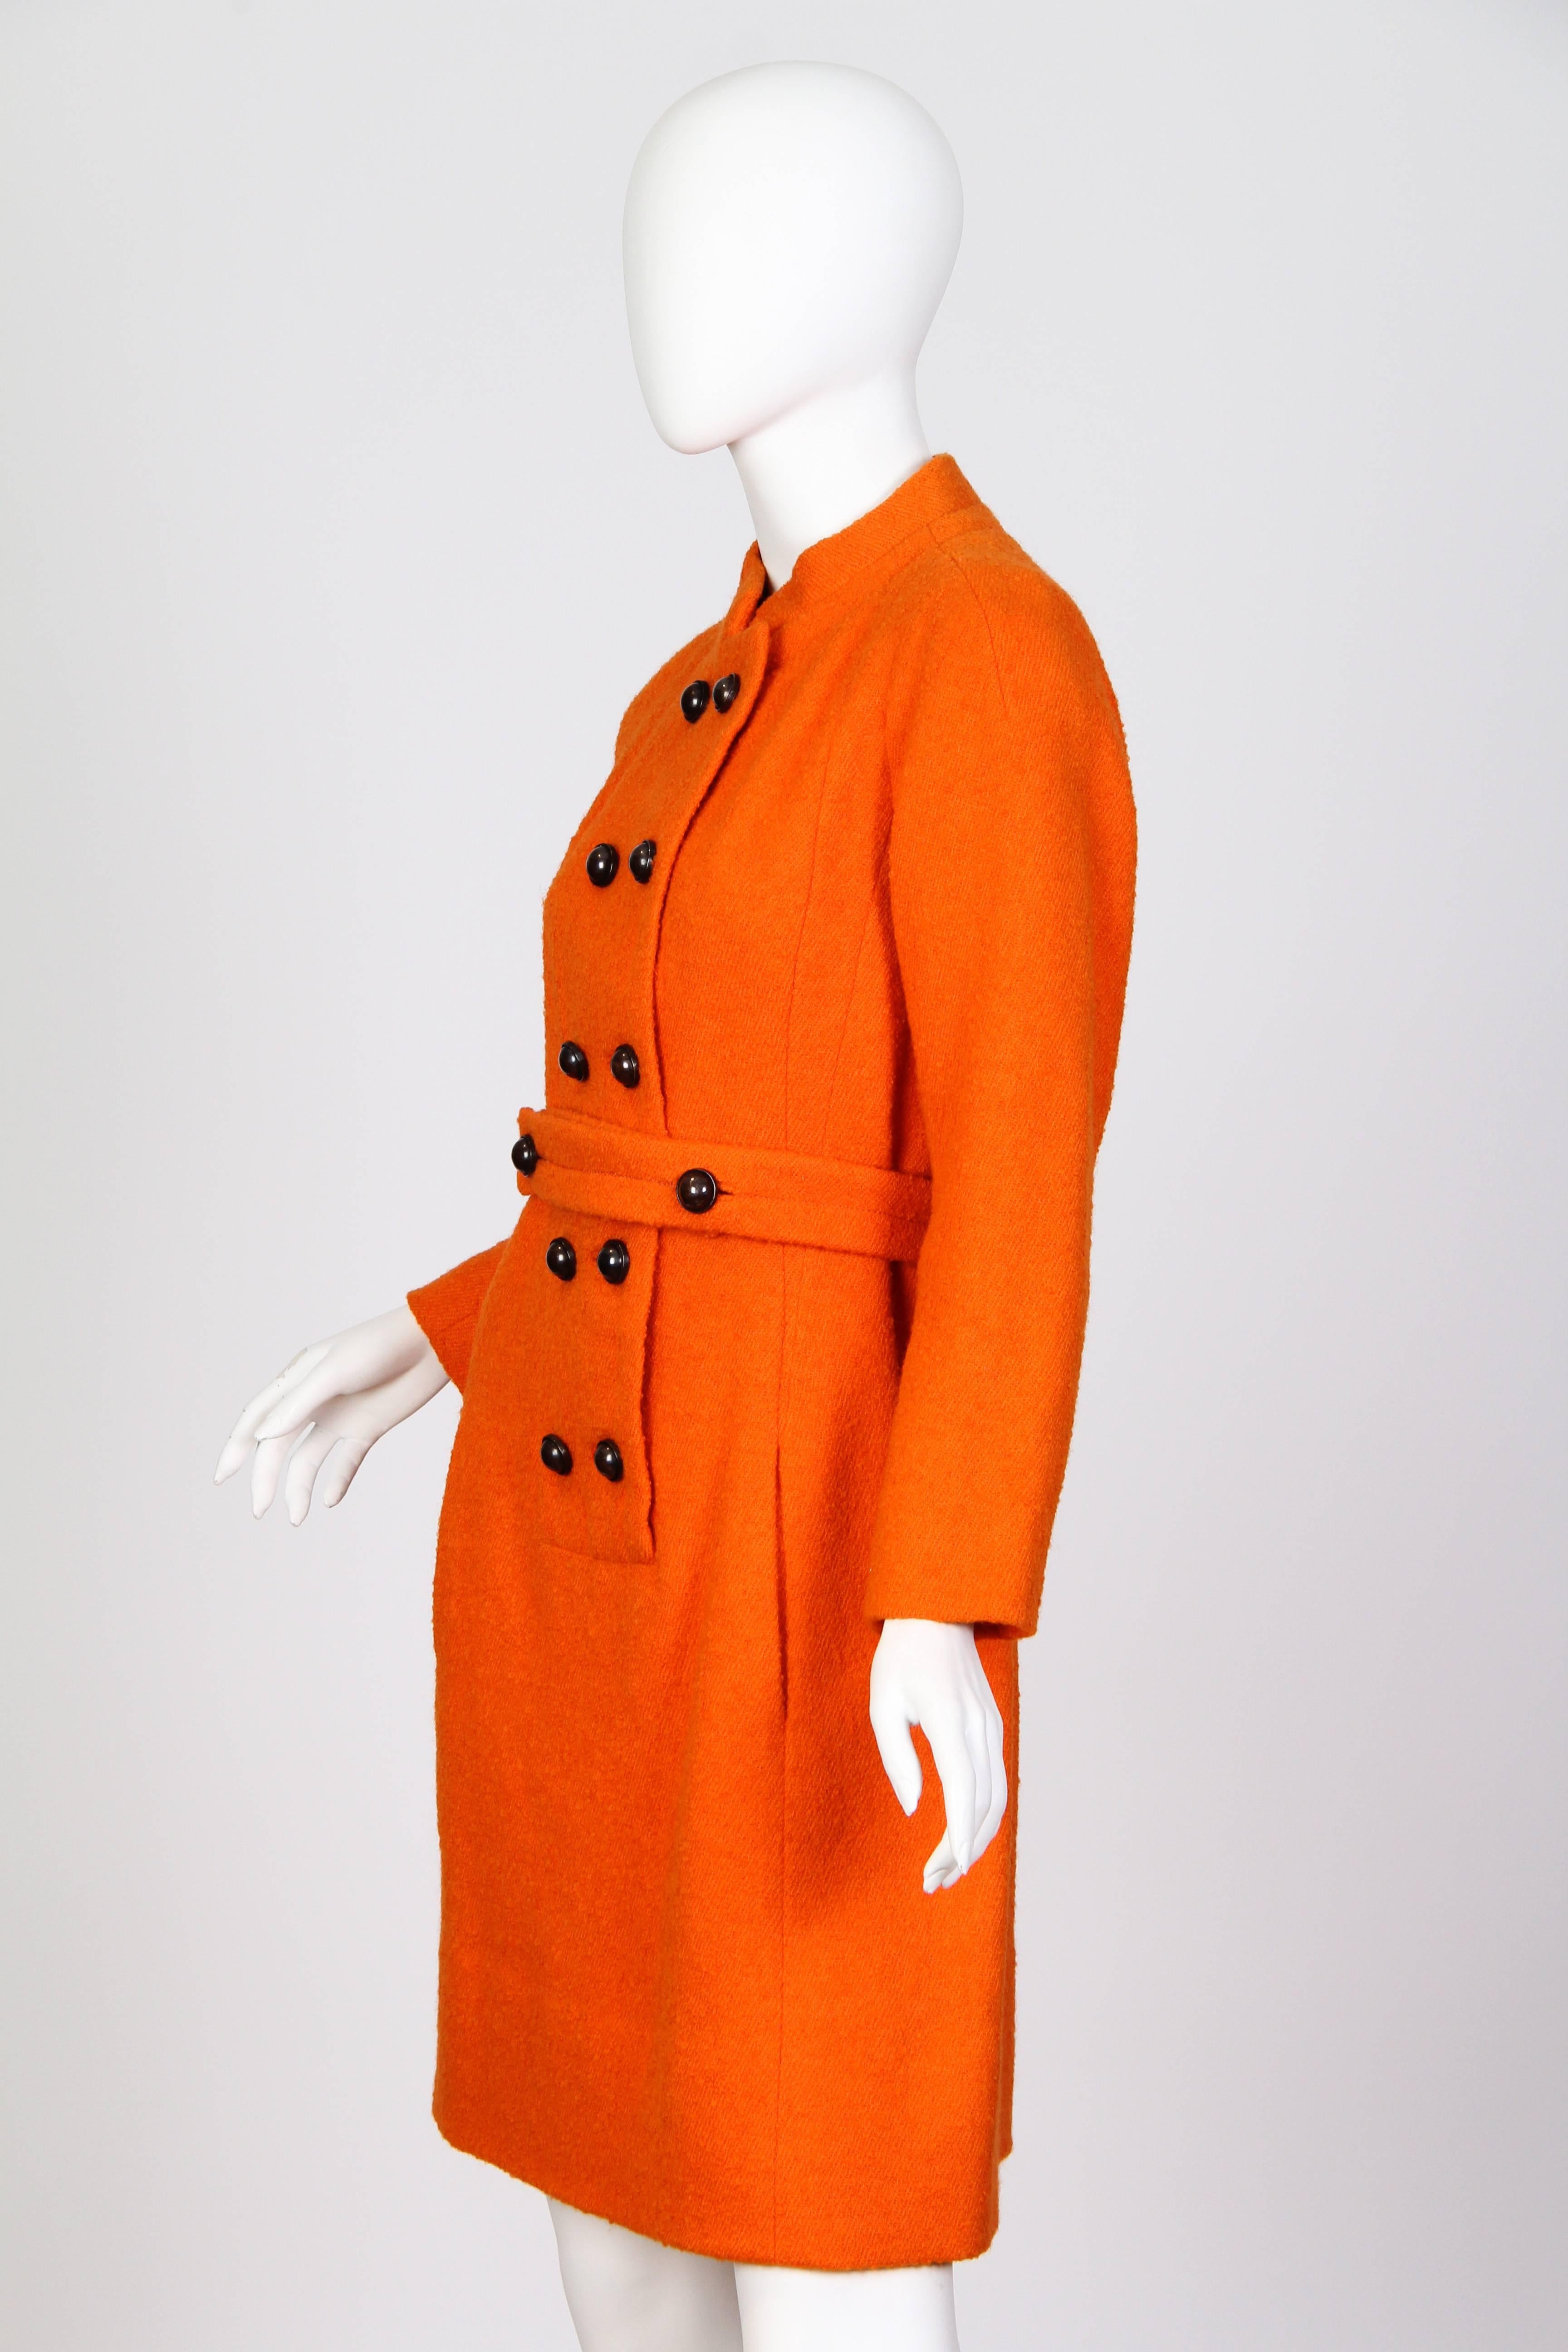 Amelia Gray ran the chicest of boutiques in Beverly Hills and was the first to really discover the master talent of James Galanos in the early 1950s. This dress dates from his early years of design. Here he has channeled the youthful spirit of the